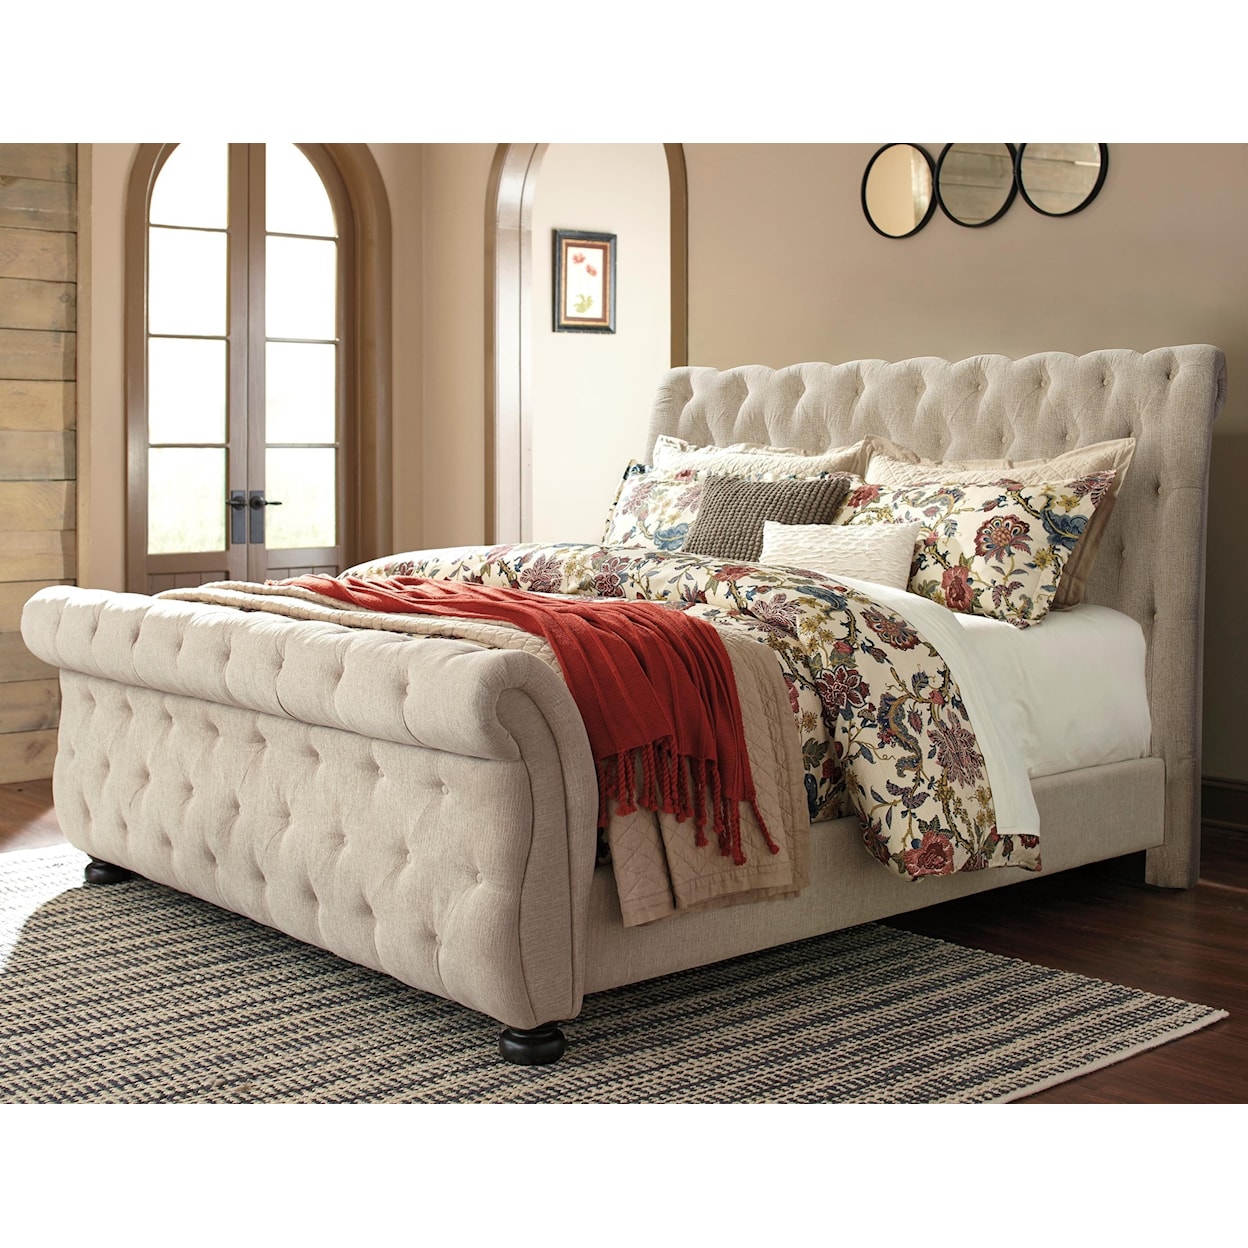 Signature Design by Ashley Furniture Willenburg King Upholstered Sleigh Bed